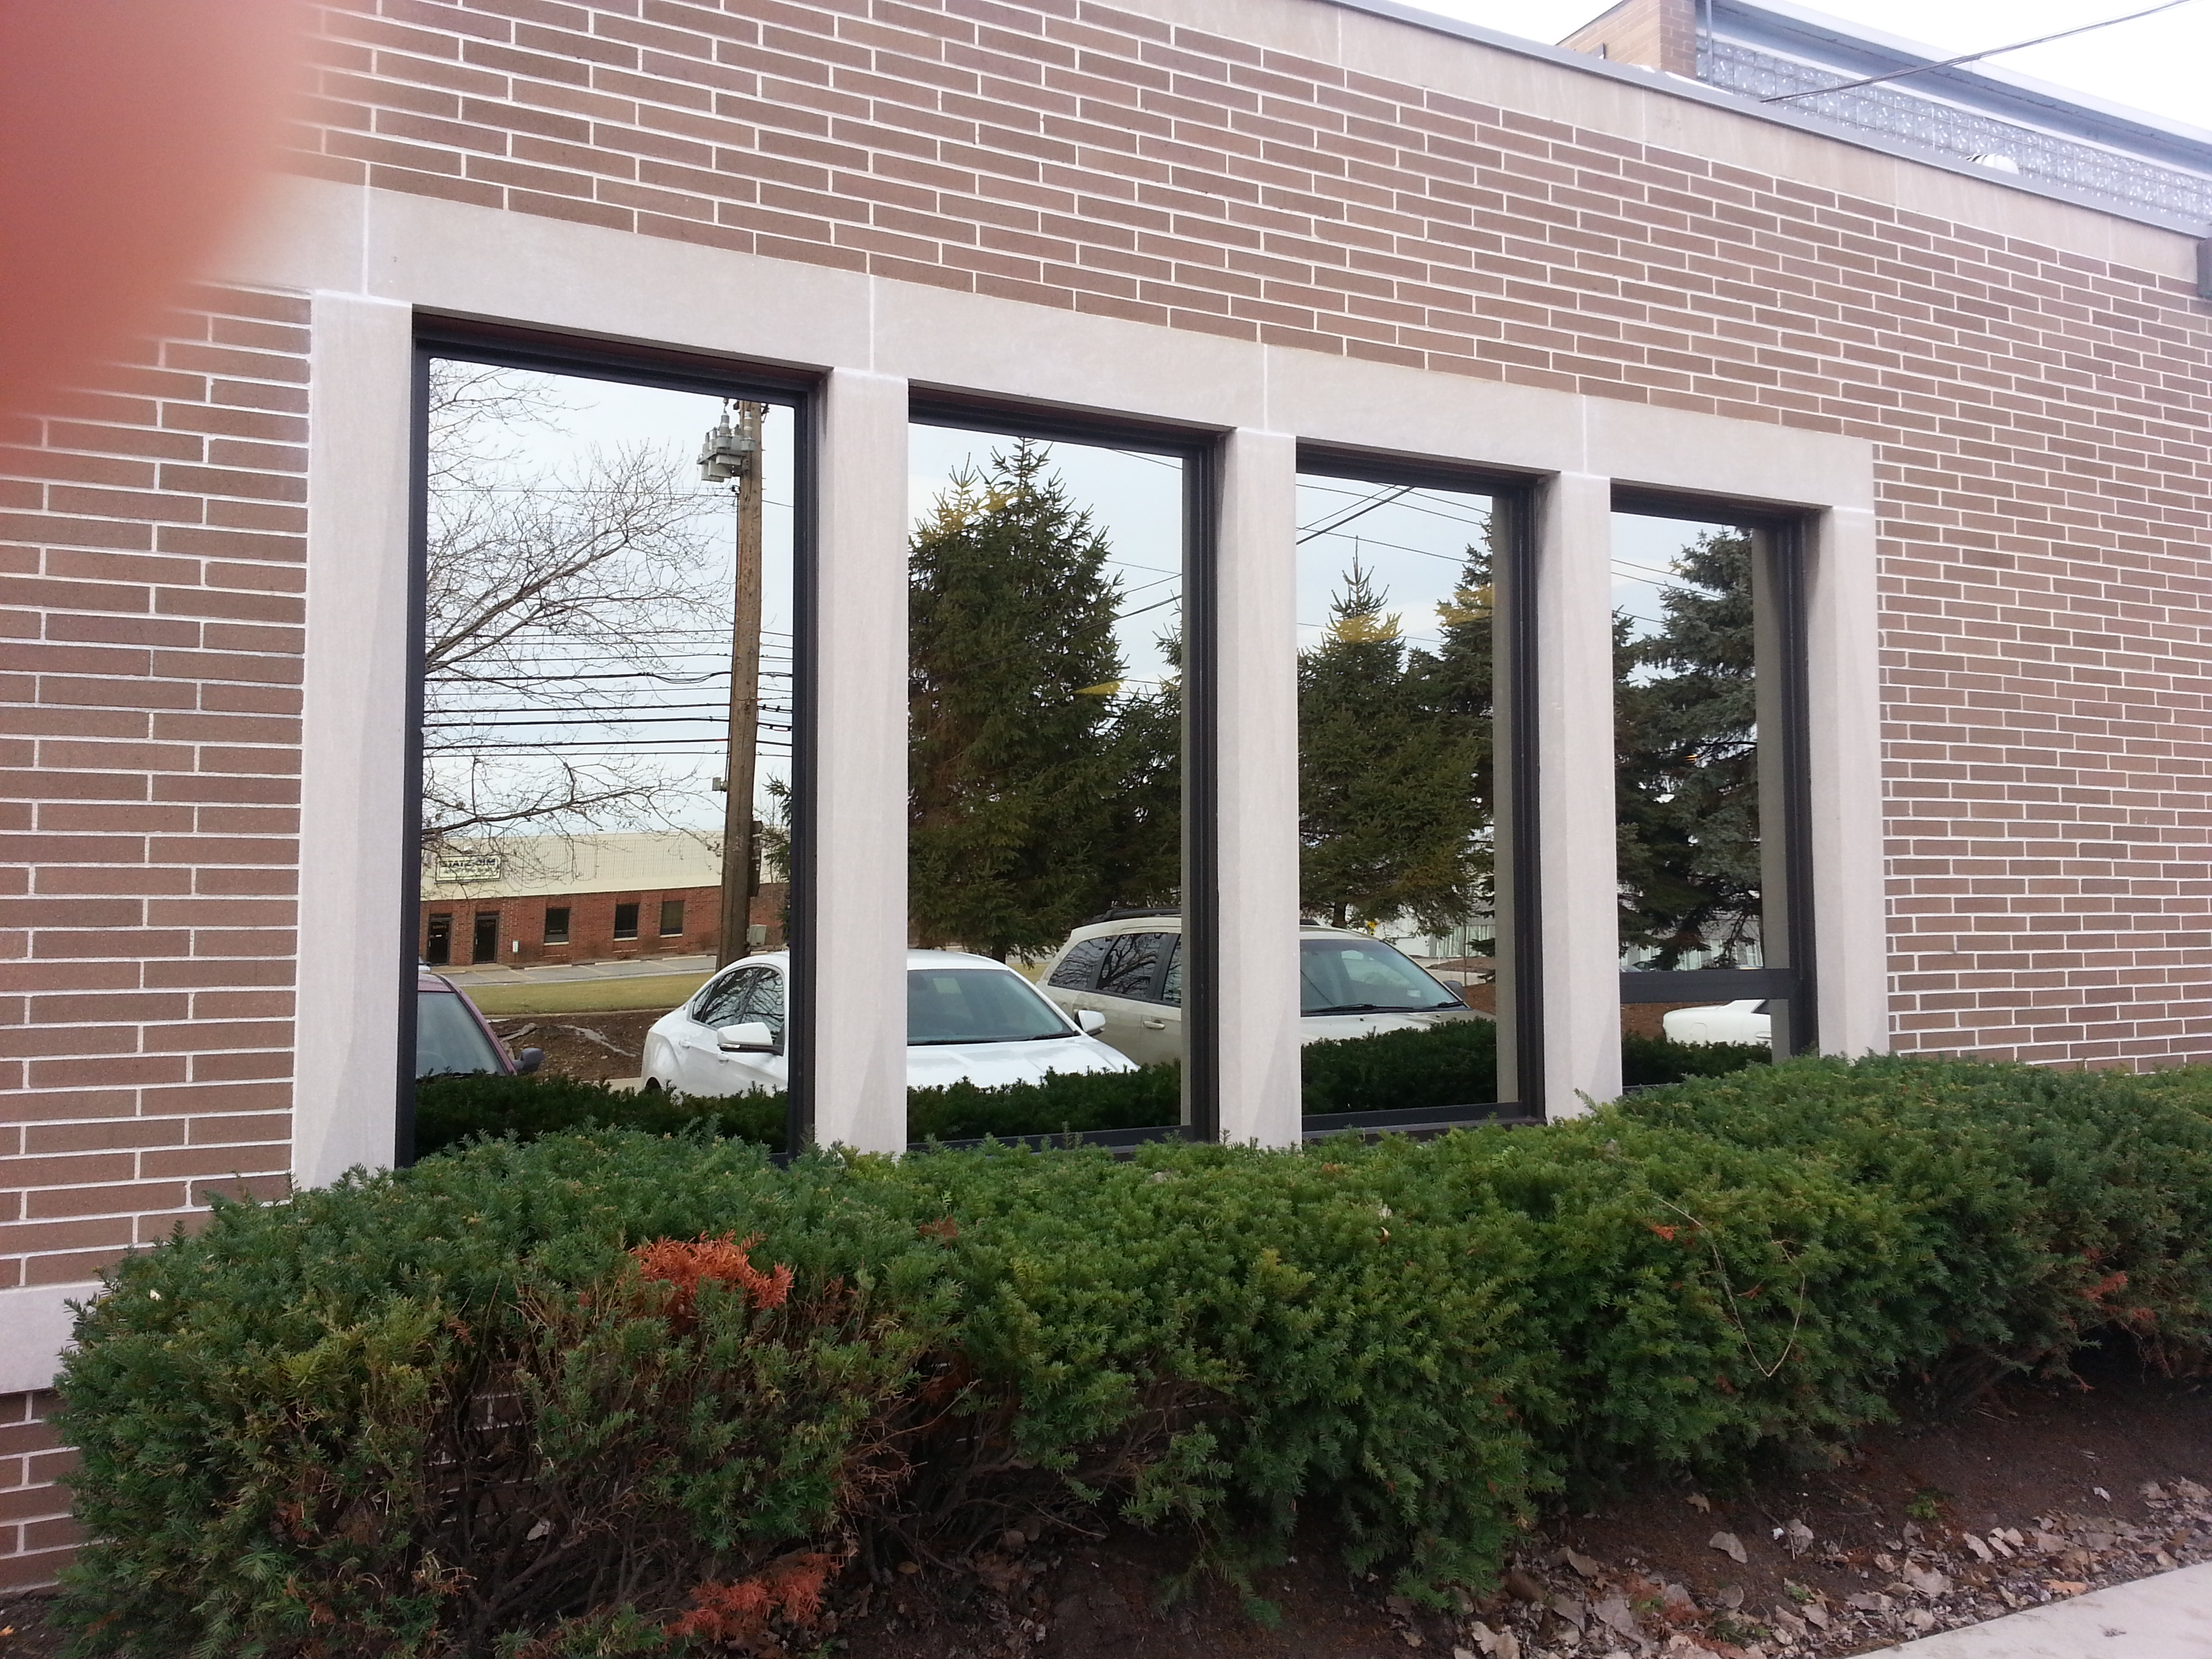 Commercial painted windows, picture and awning, bronze tint, Bedford Ohio